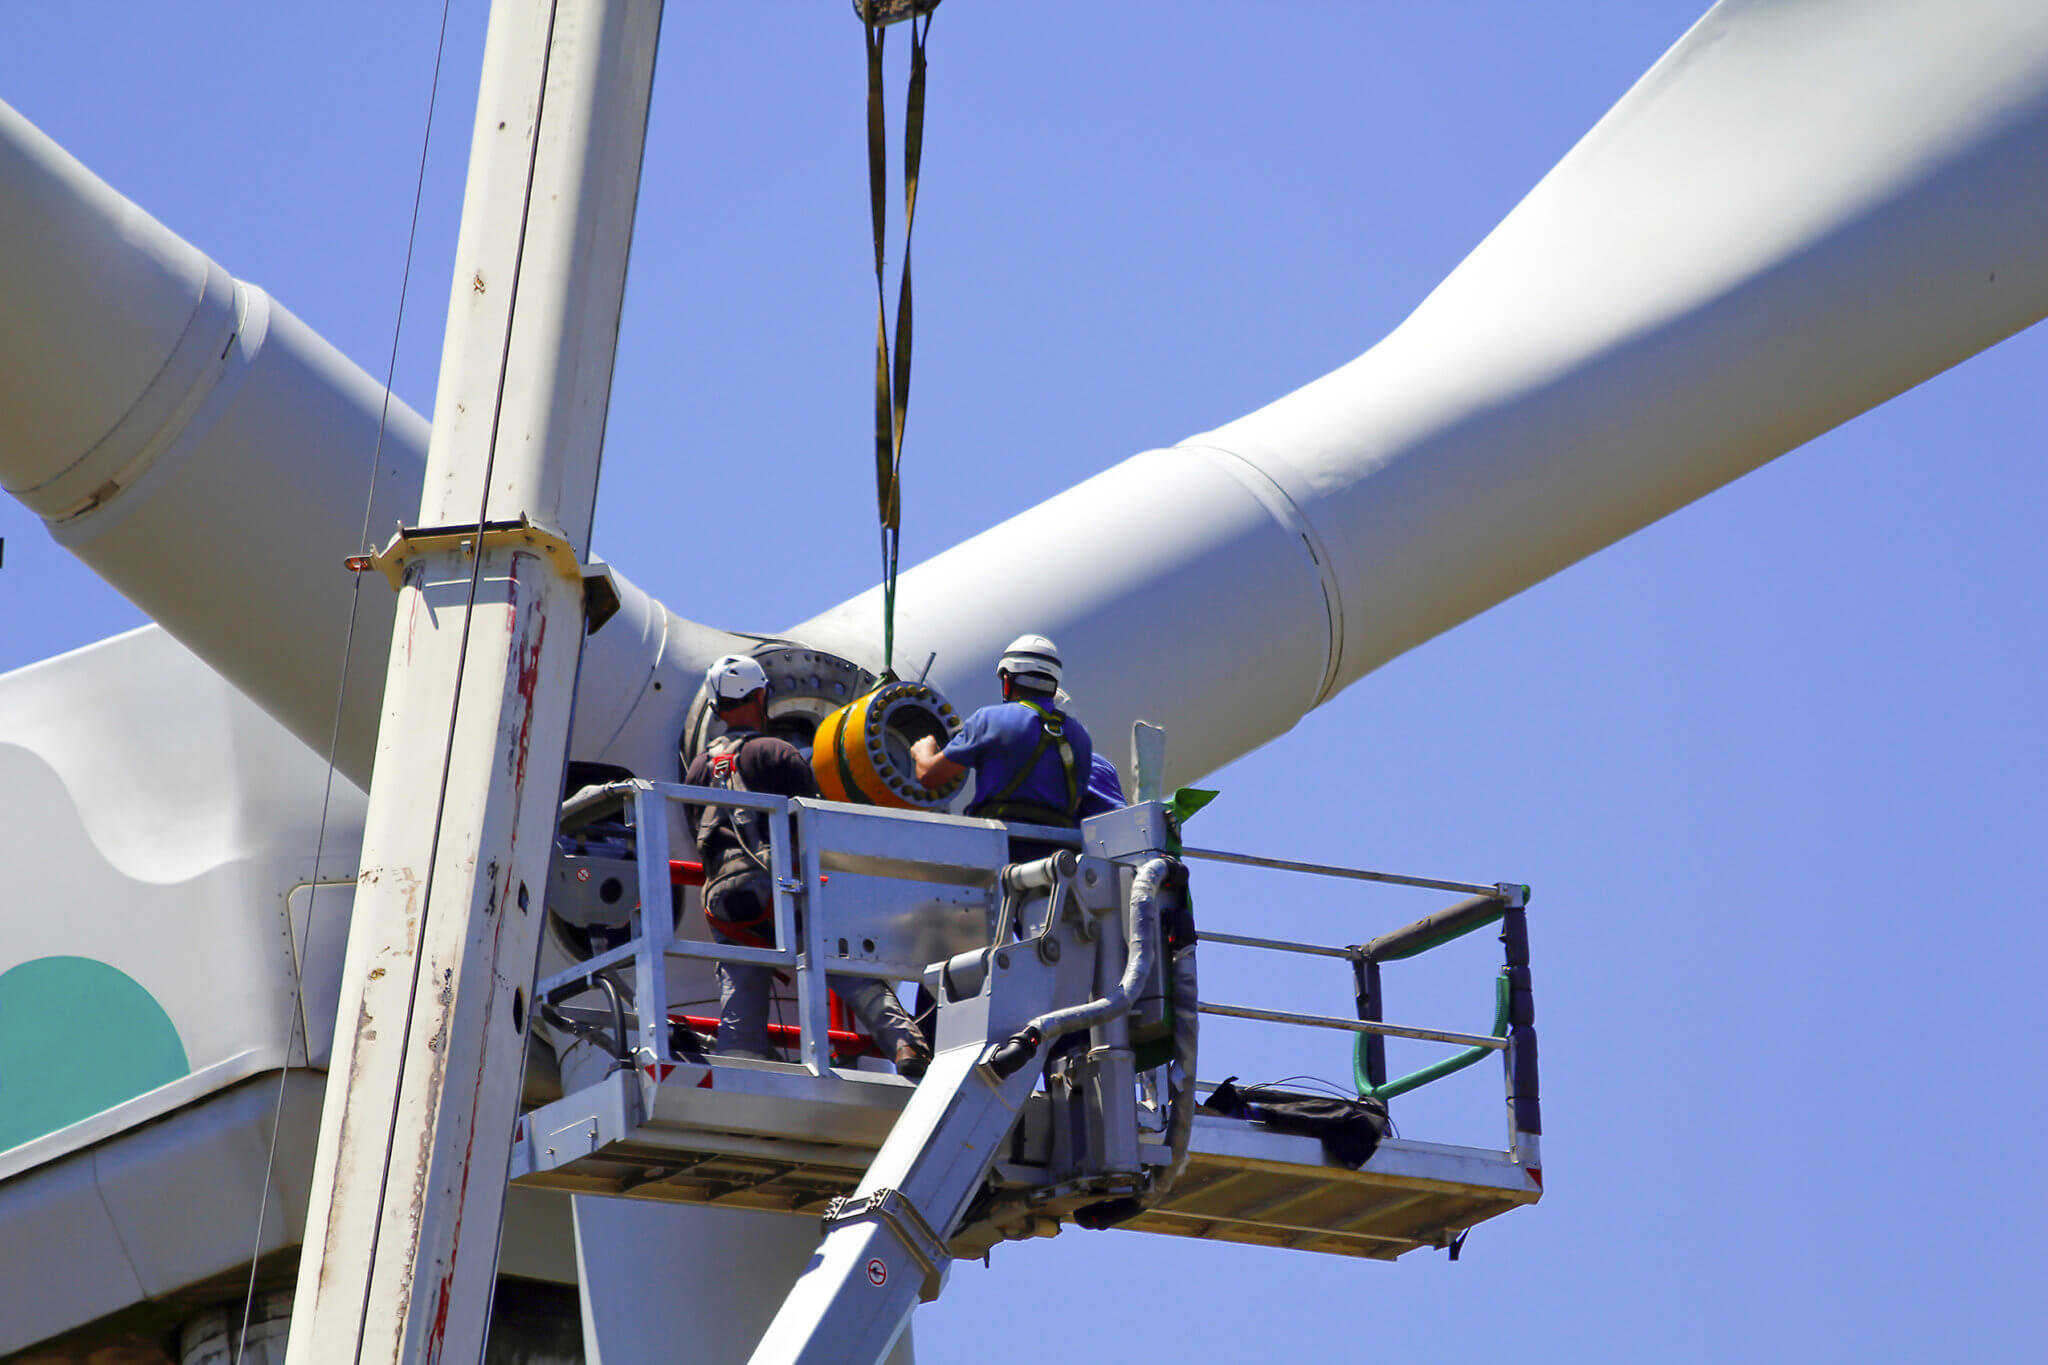 Workers suspended working on a wind turbine project.